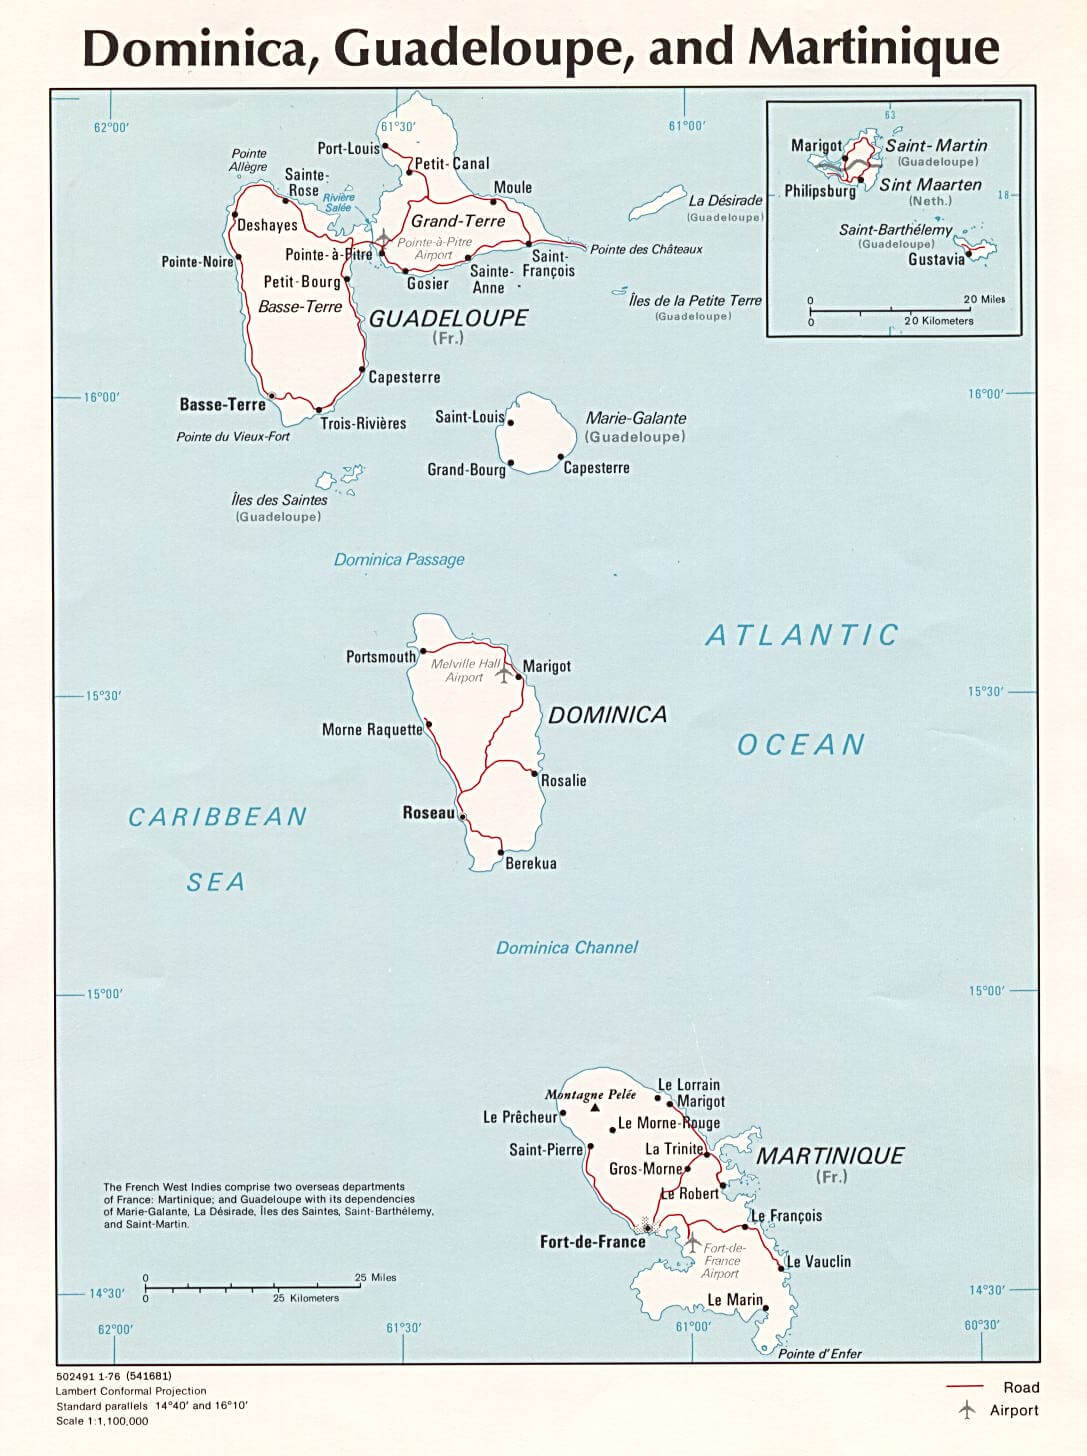 Dominica Country Political Map 1976